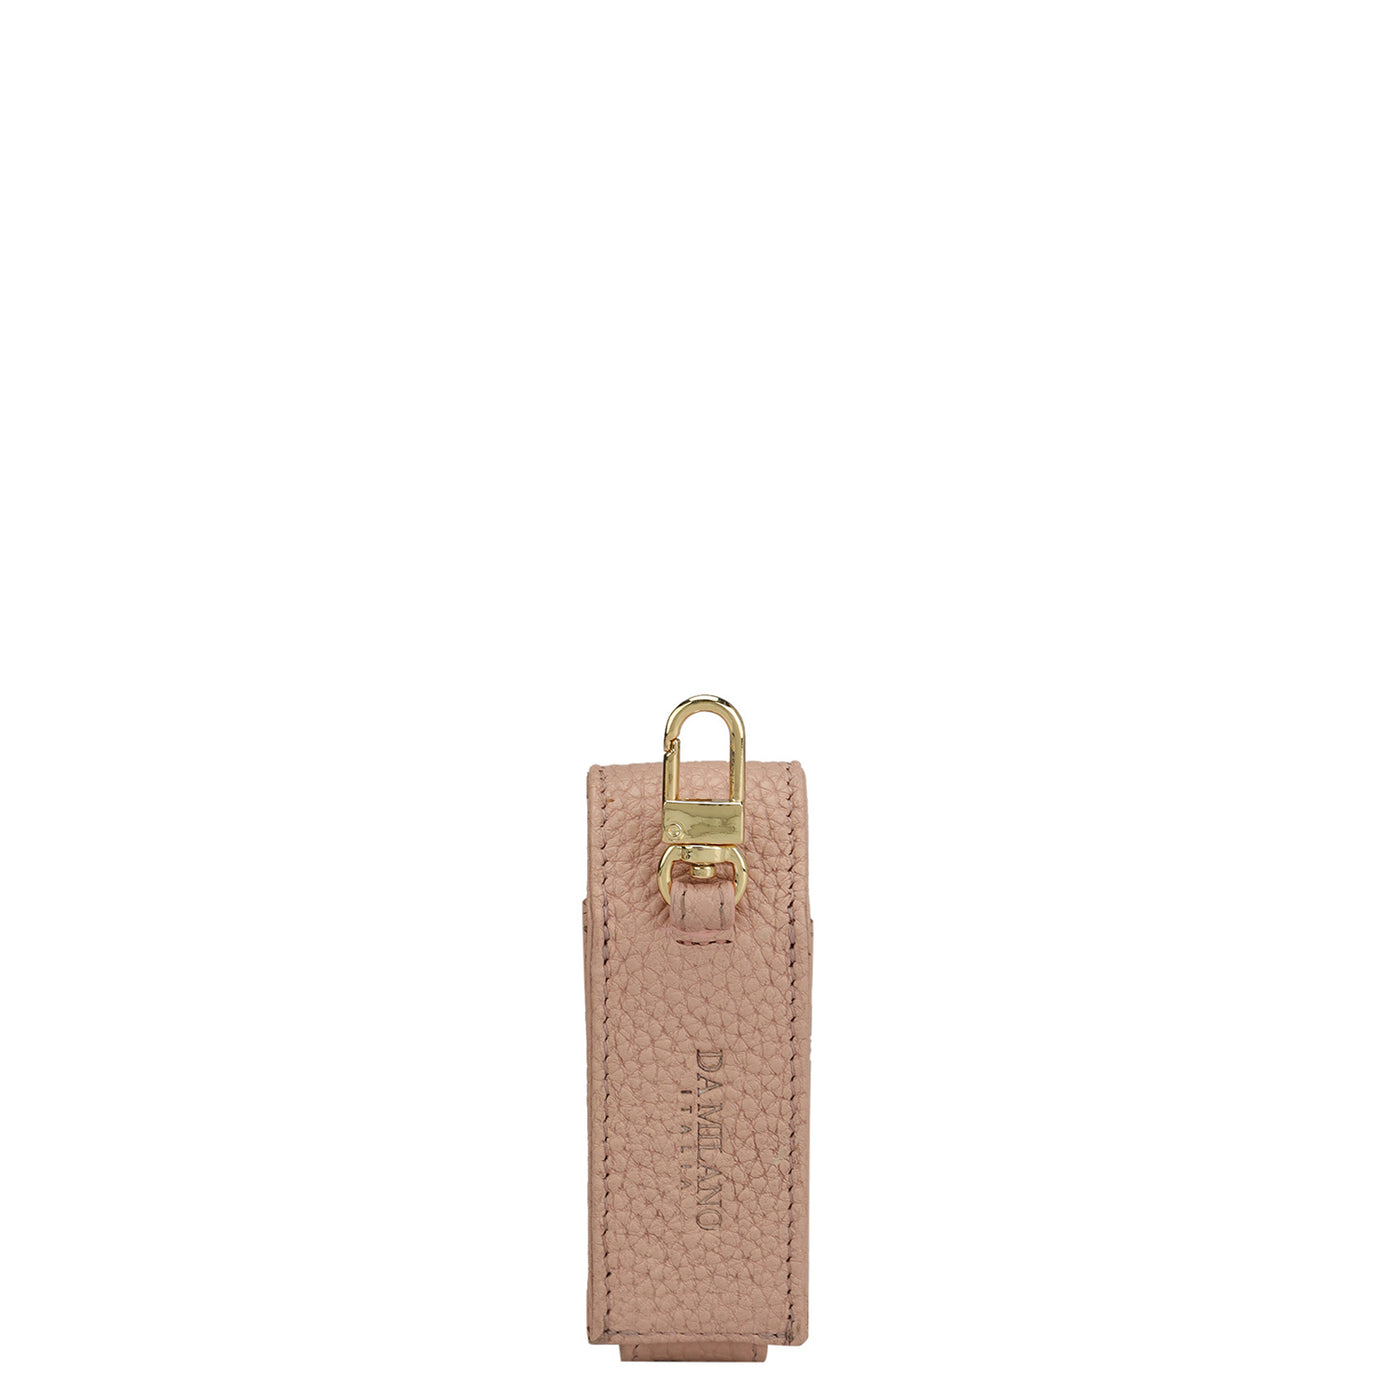 Wax Leather Lipstick Case - Baby Pink